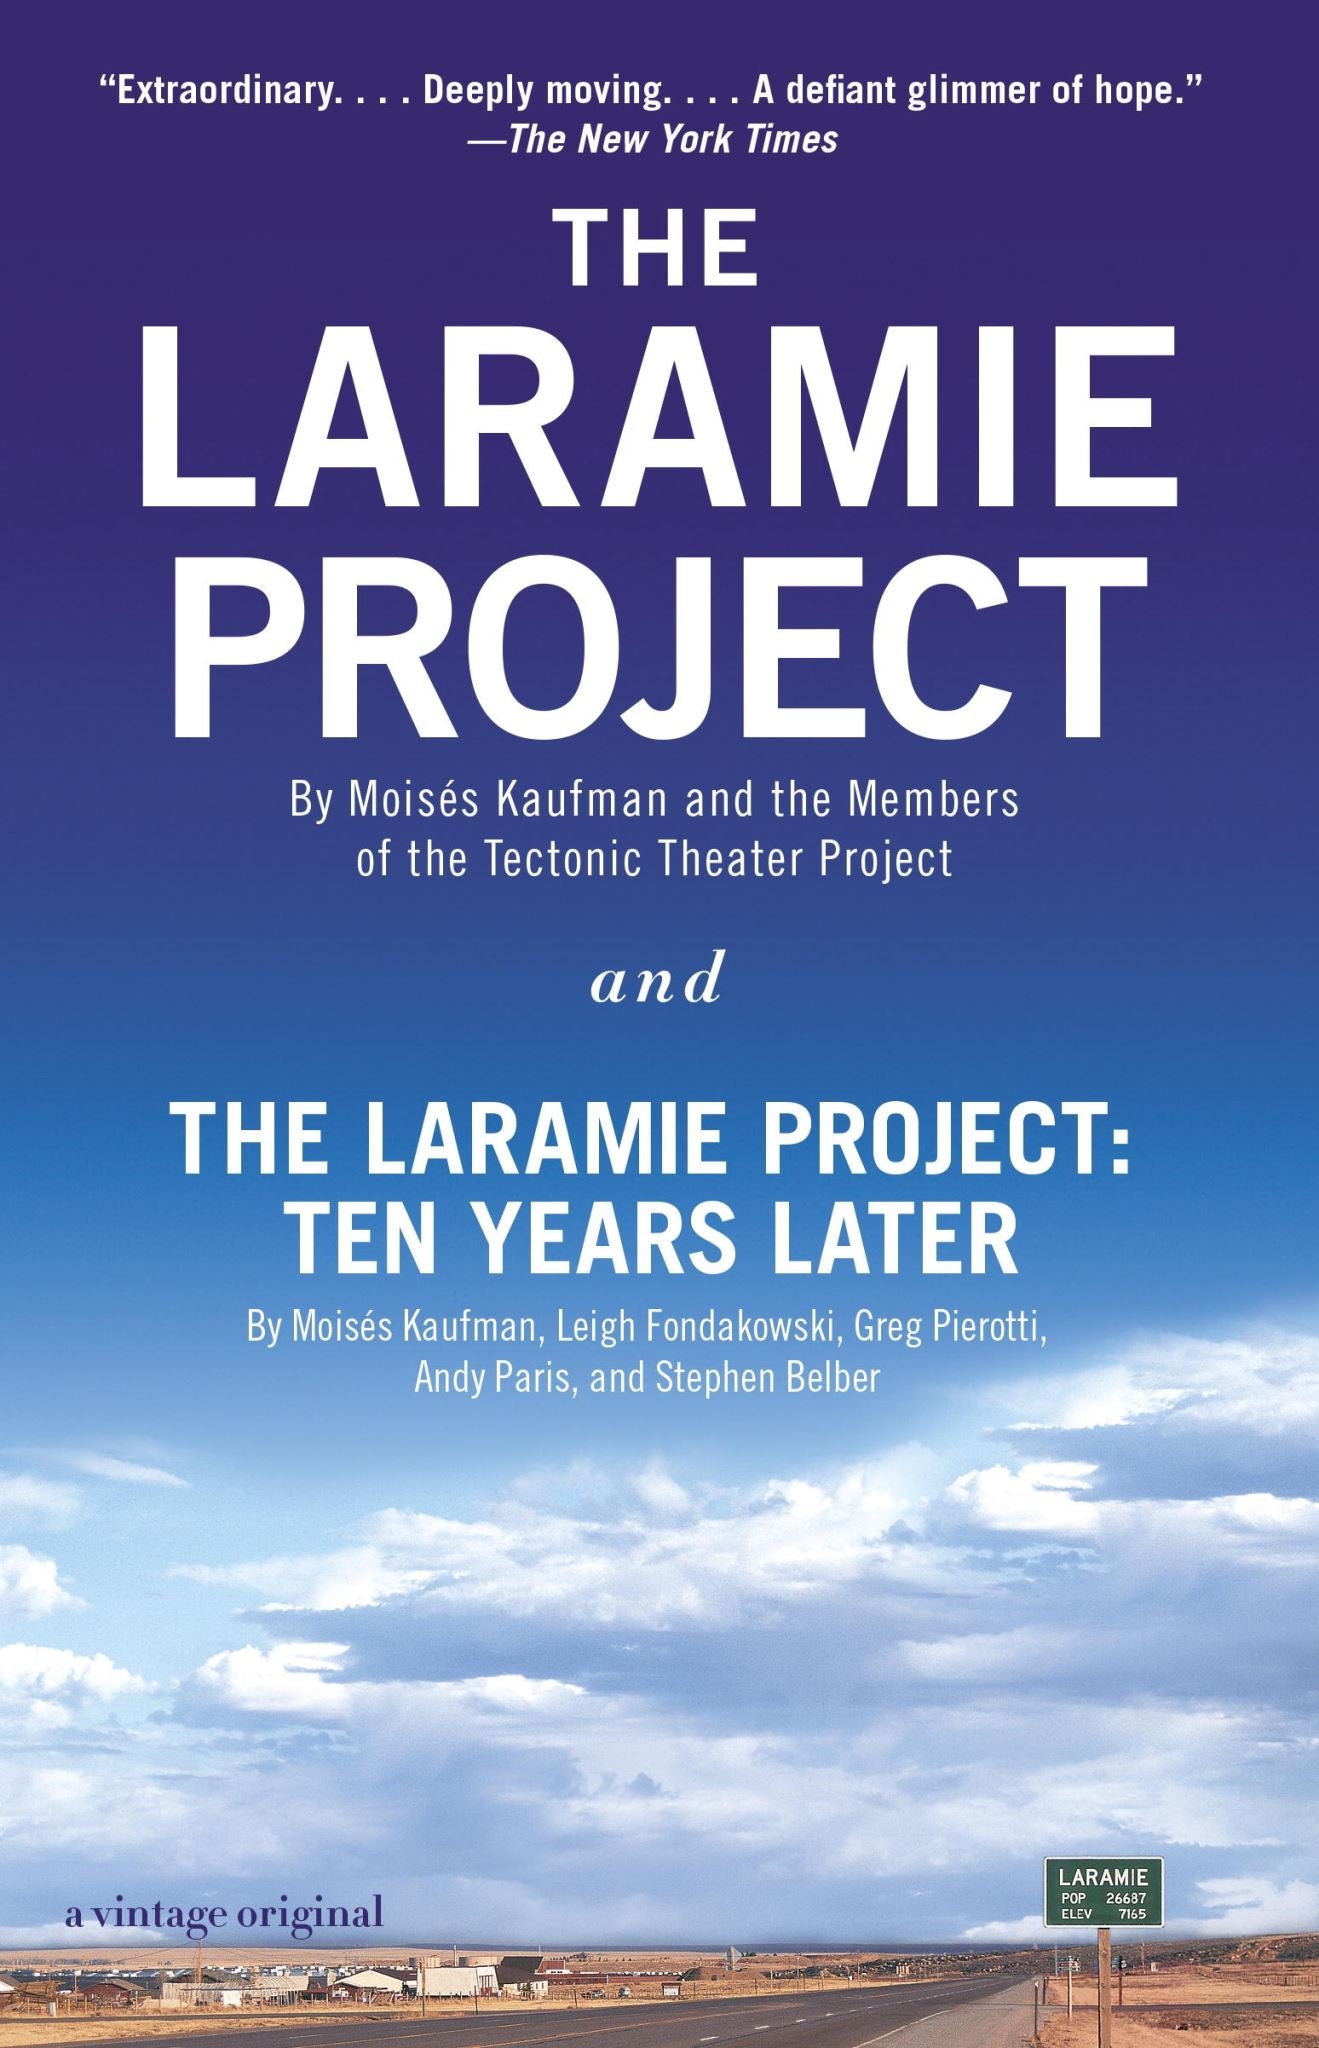 The Laramie Project and The Laramie Project